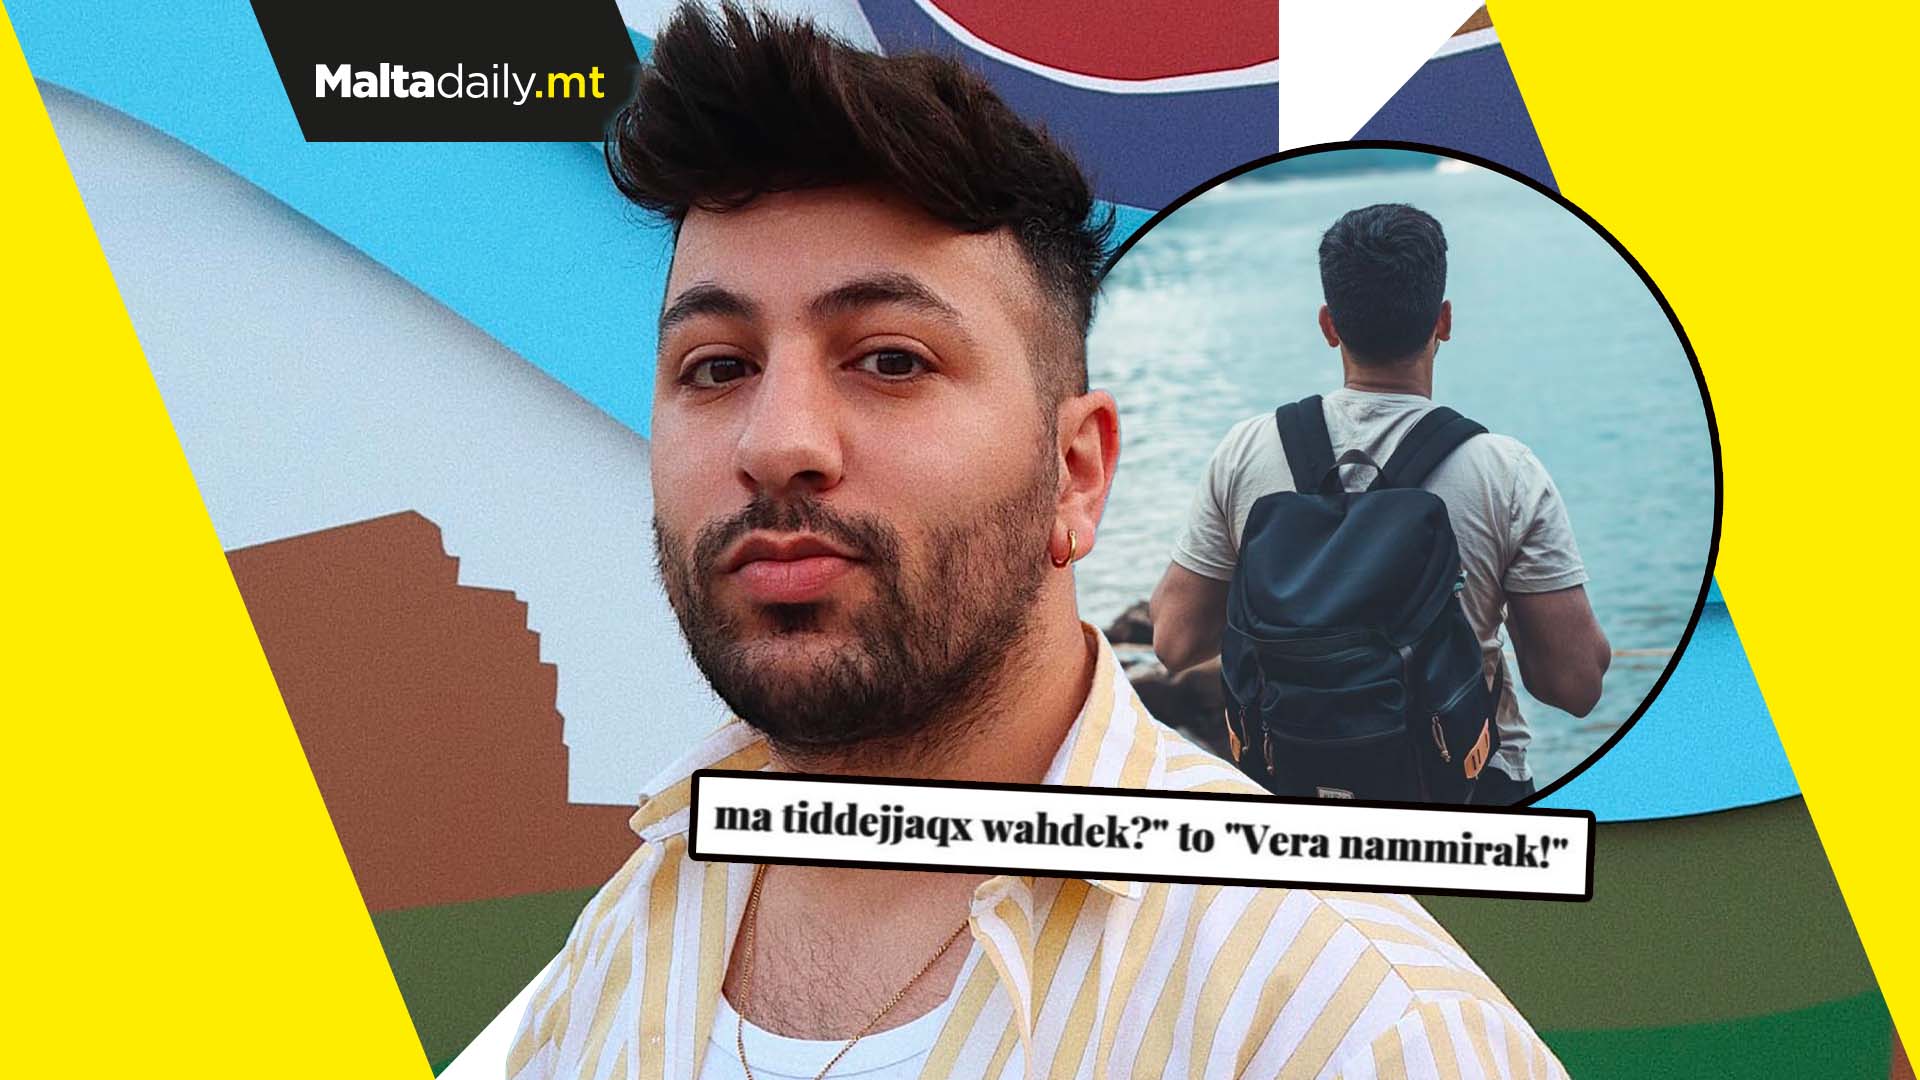 One of Malta’s first ‘Instagrammers’ talks about how it’s okay to spend time alone